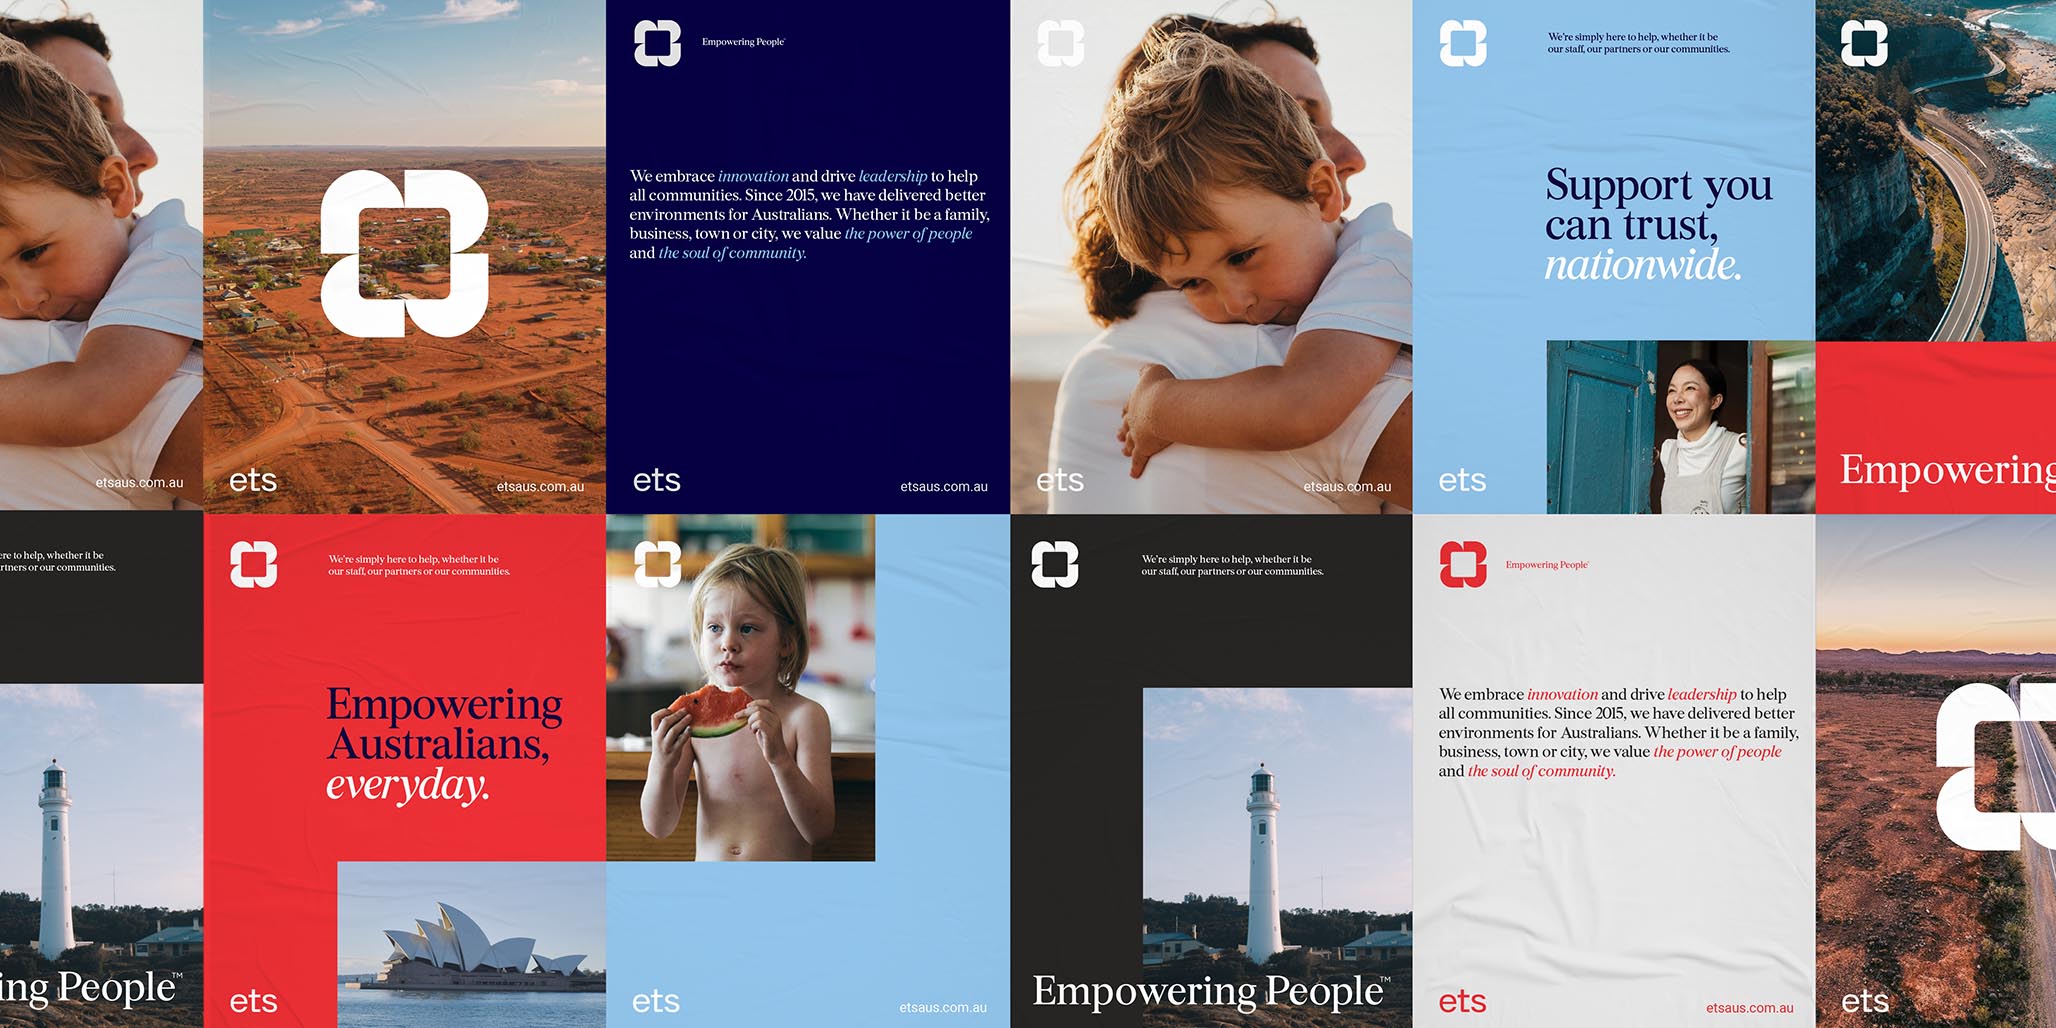 Brand strategy and rebranding for an Australian company by brand designers, Percept, Image I